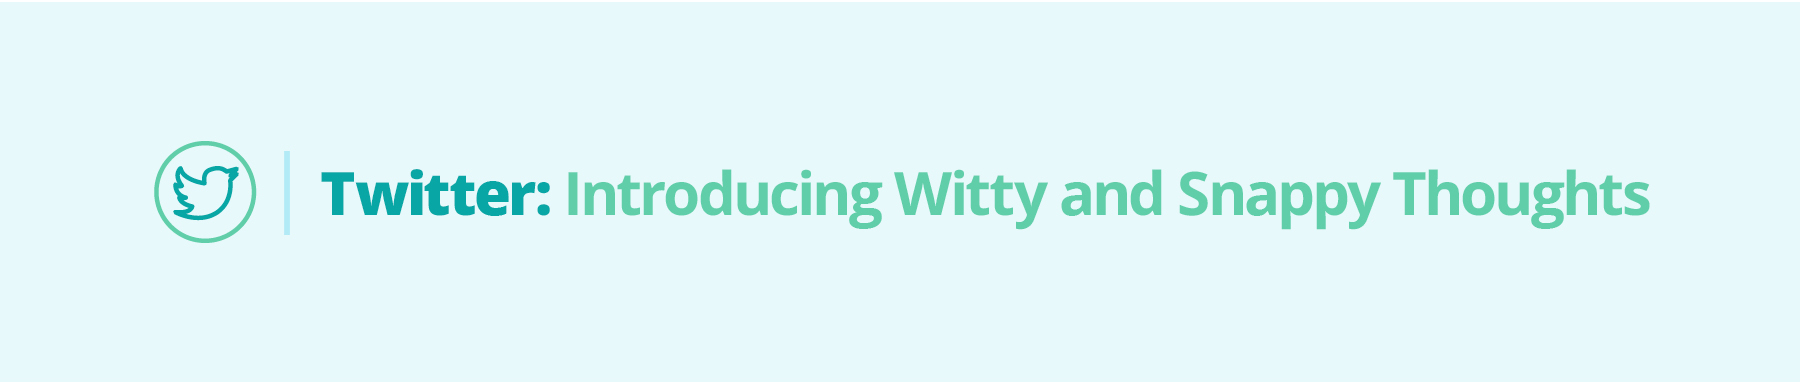 Twitter: Introducing Witty and Snappy Thoughts